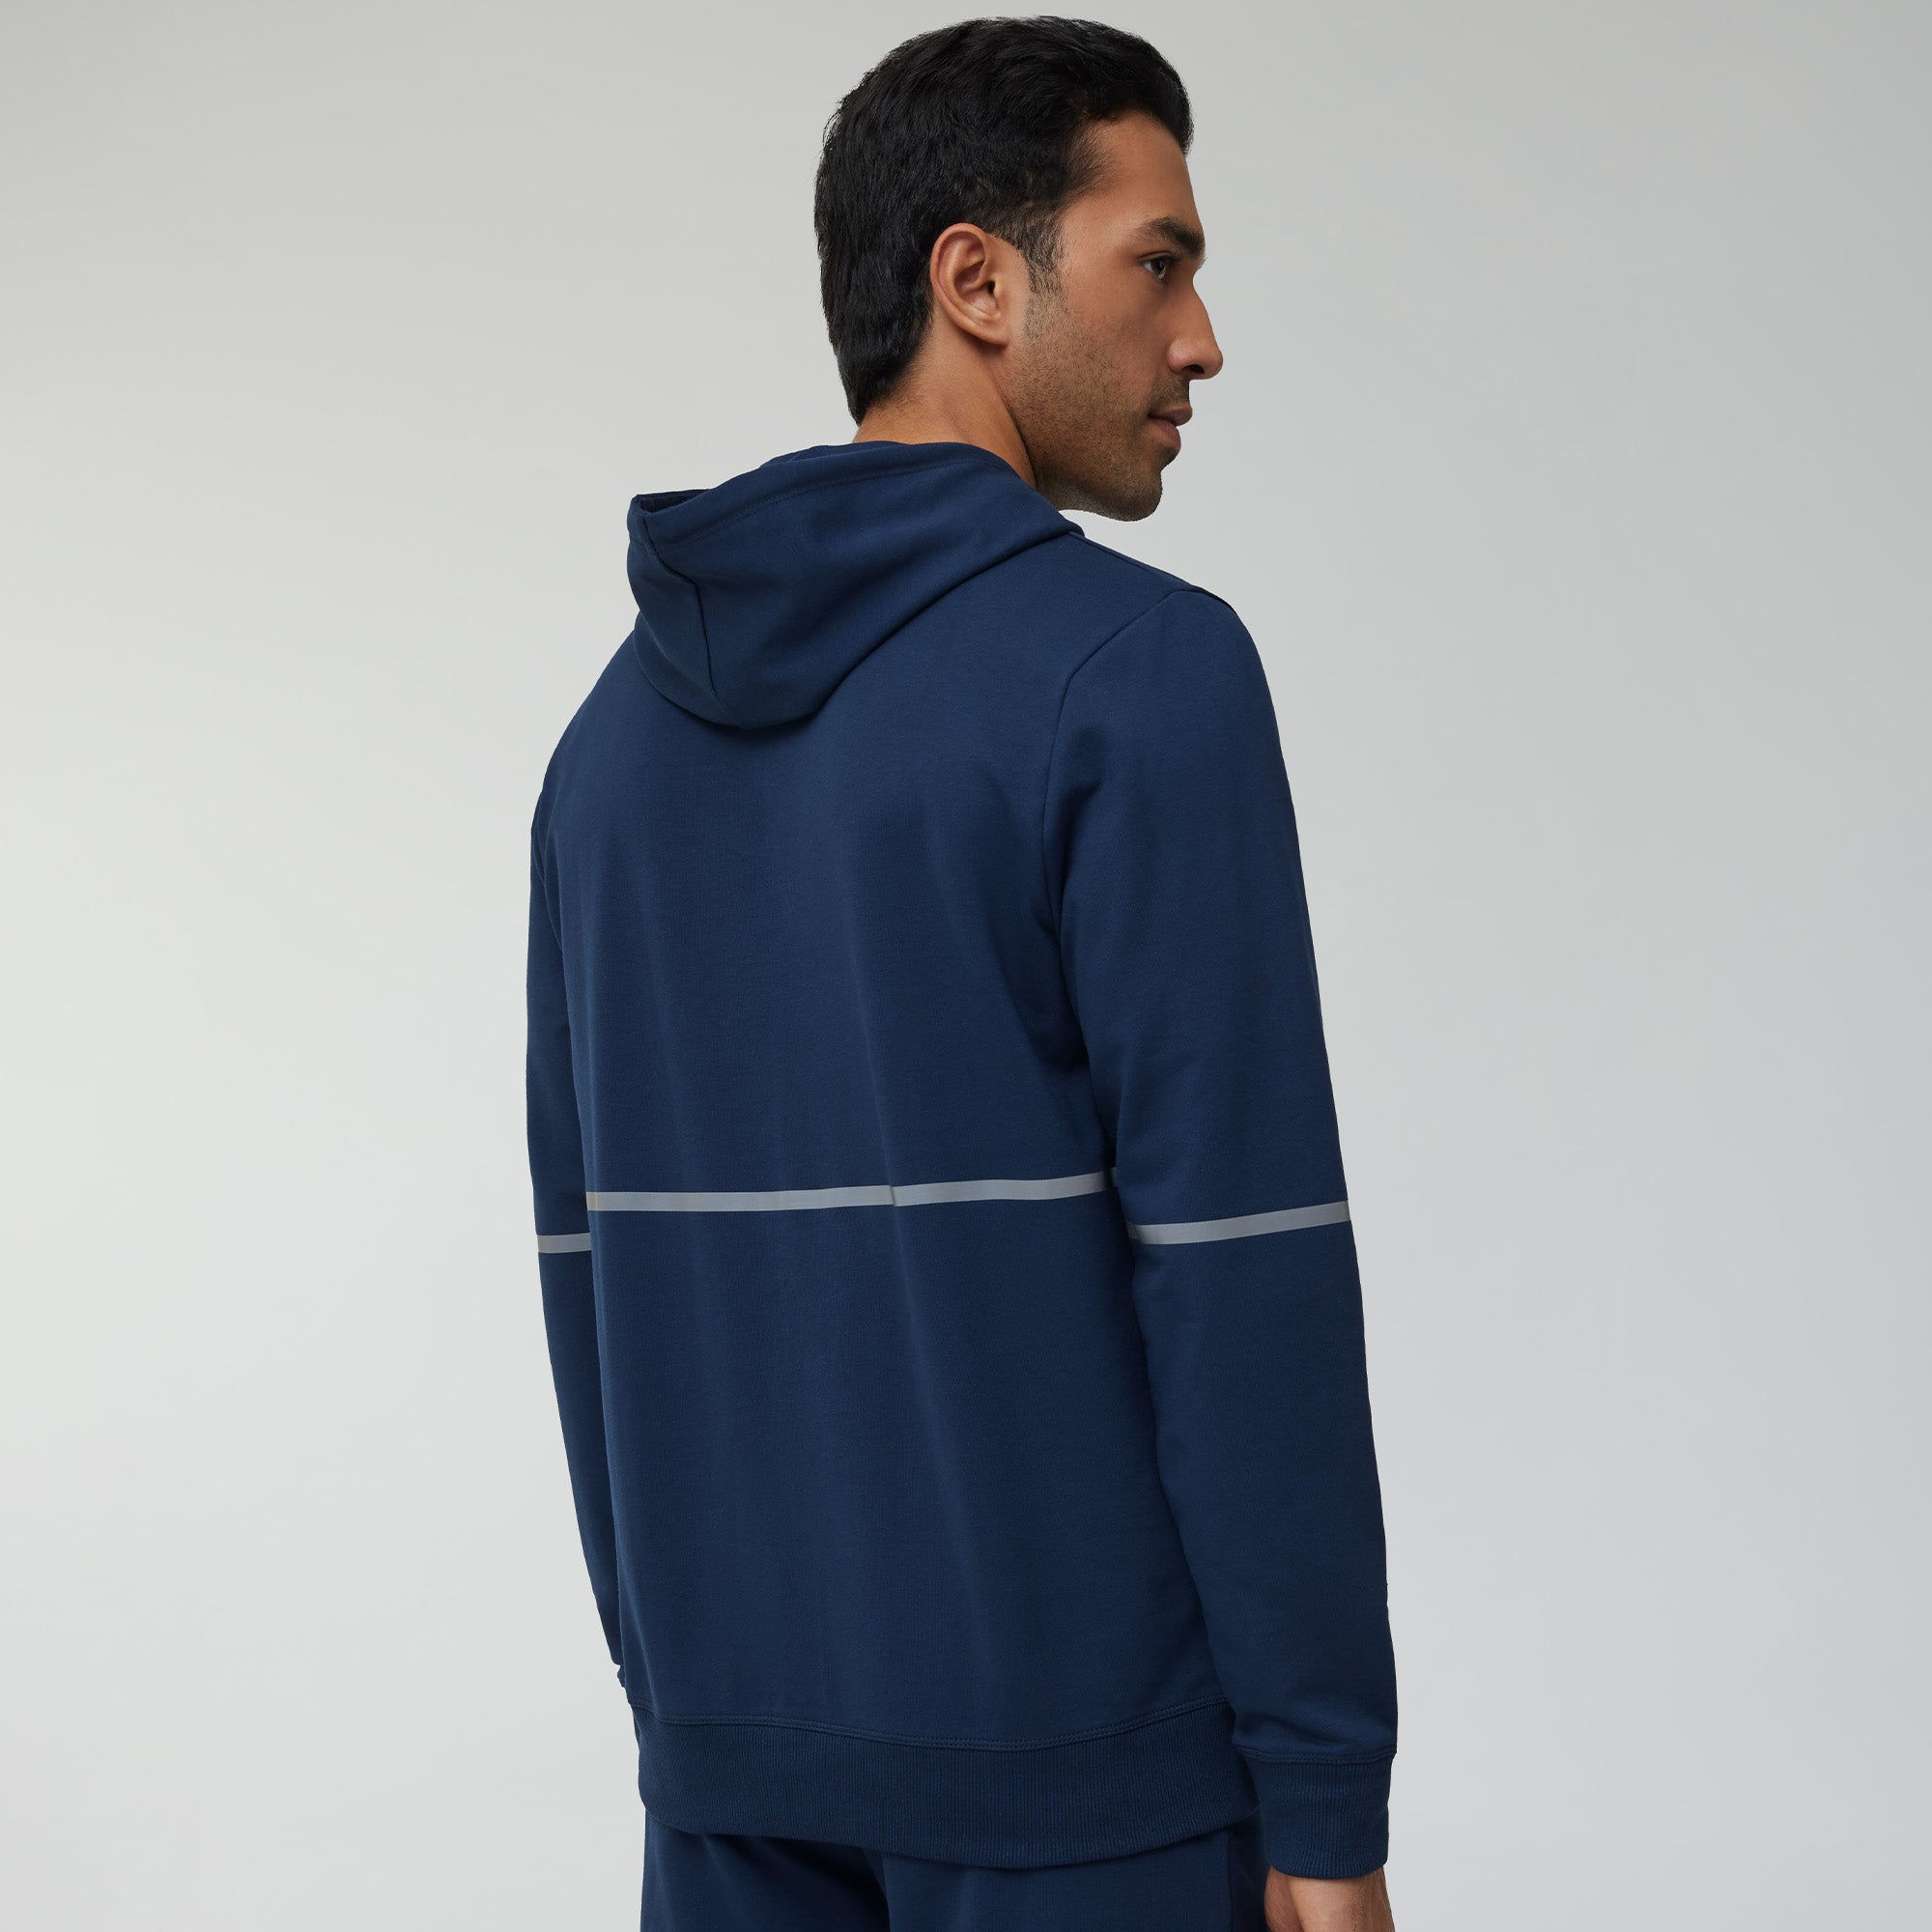 Ascent French Terry Cotton Blend Hoodies Midnight Blue